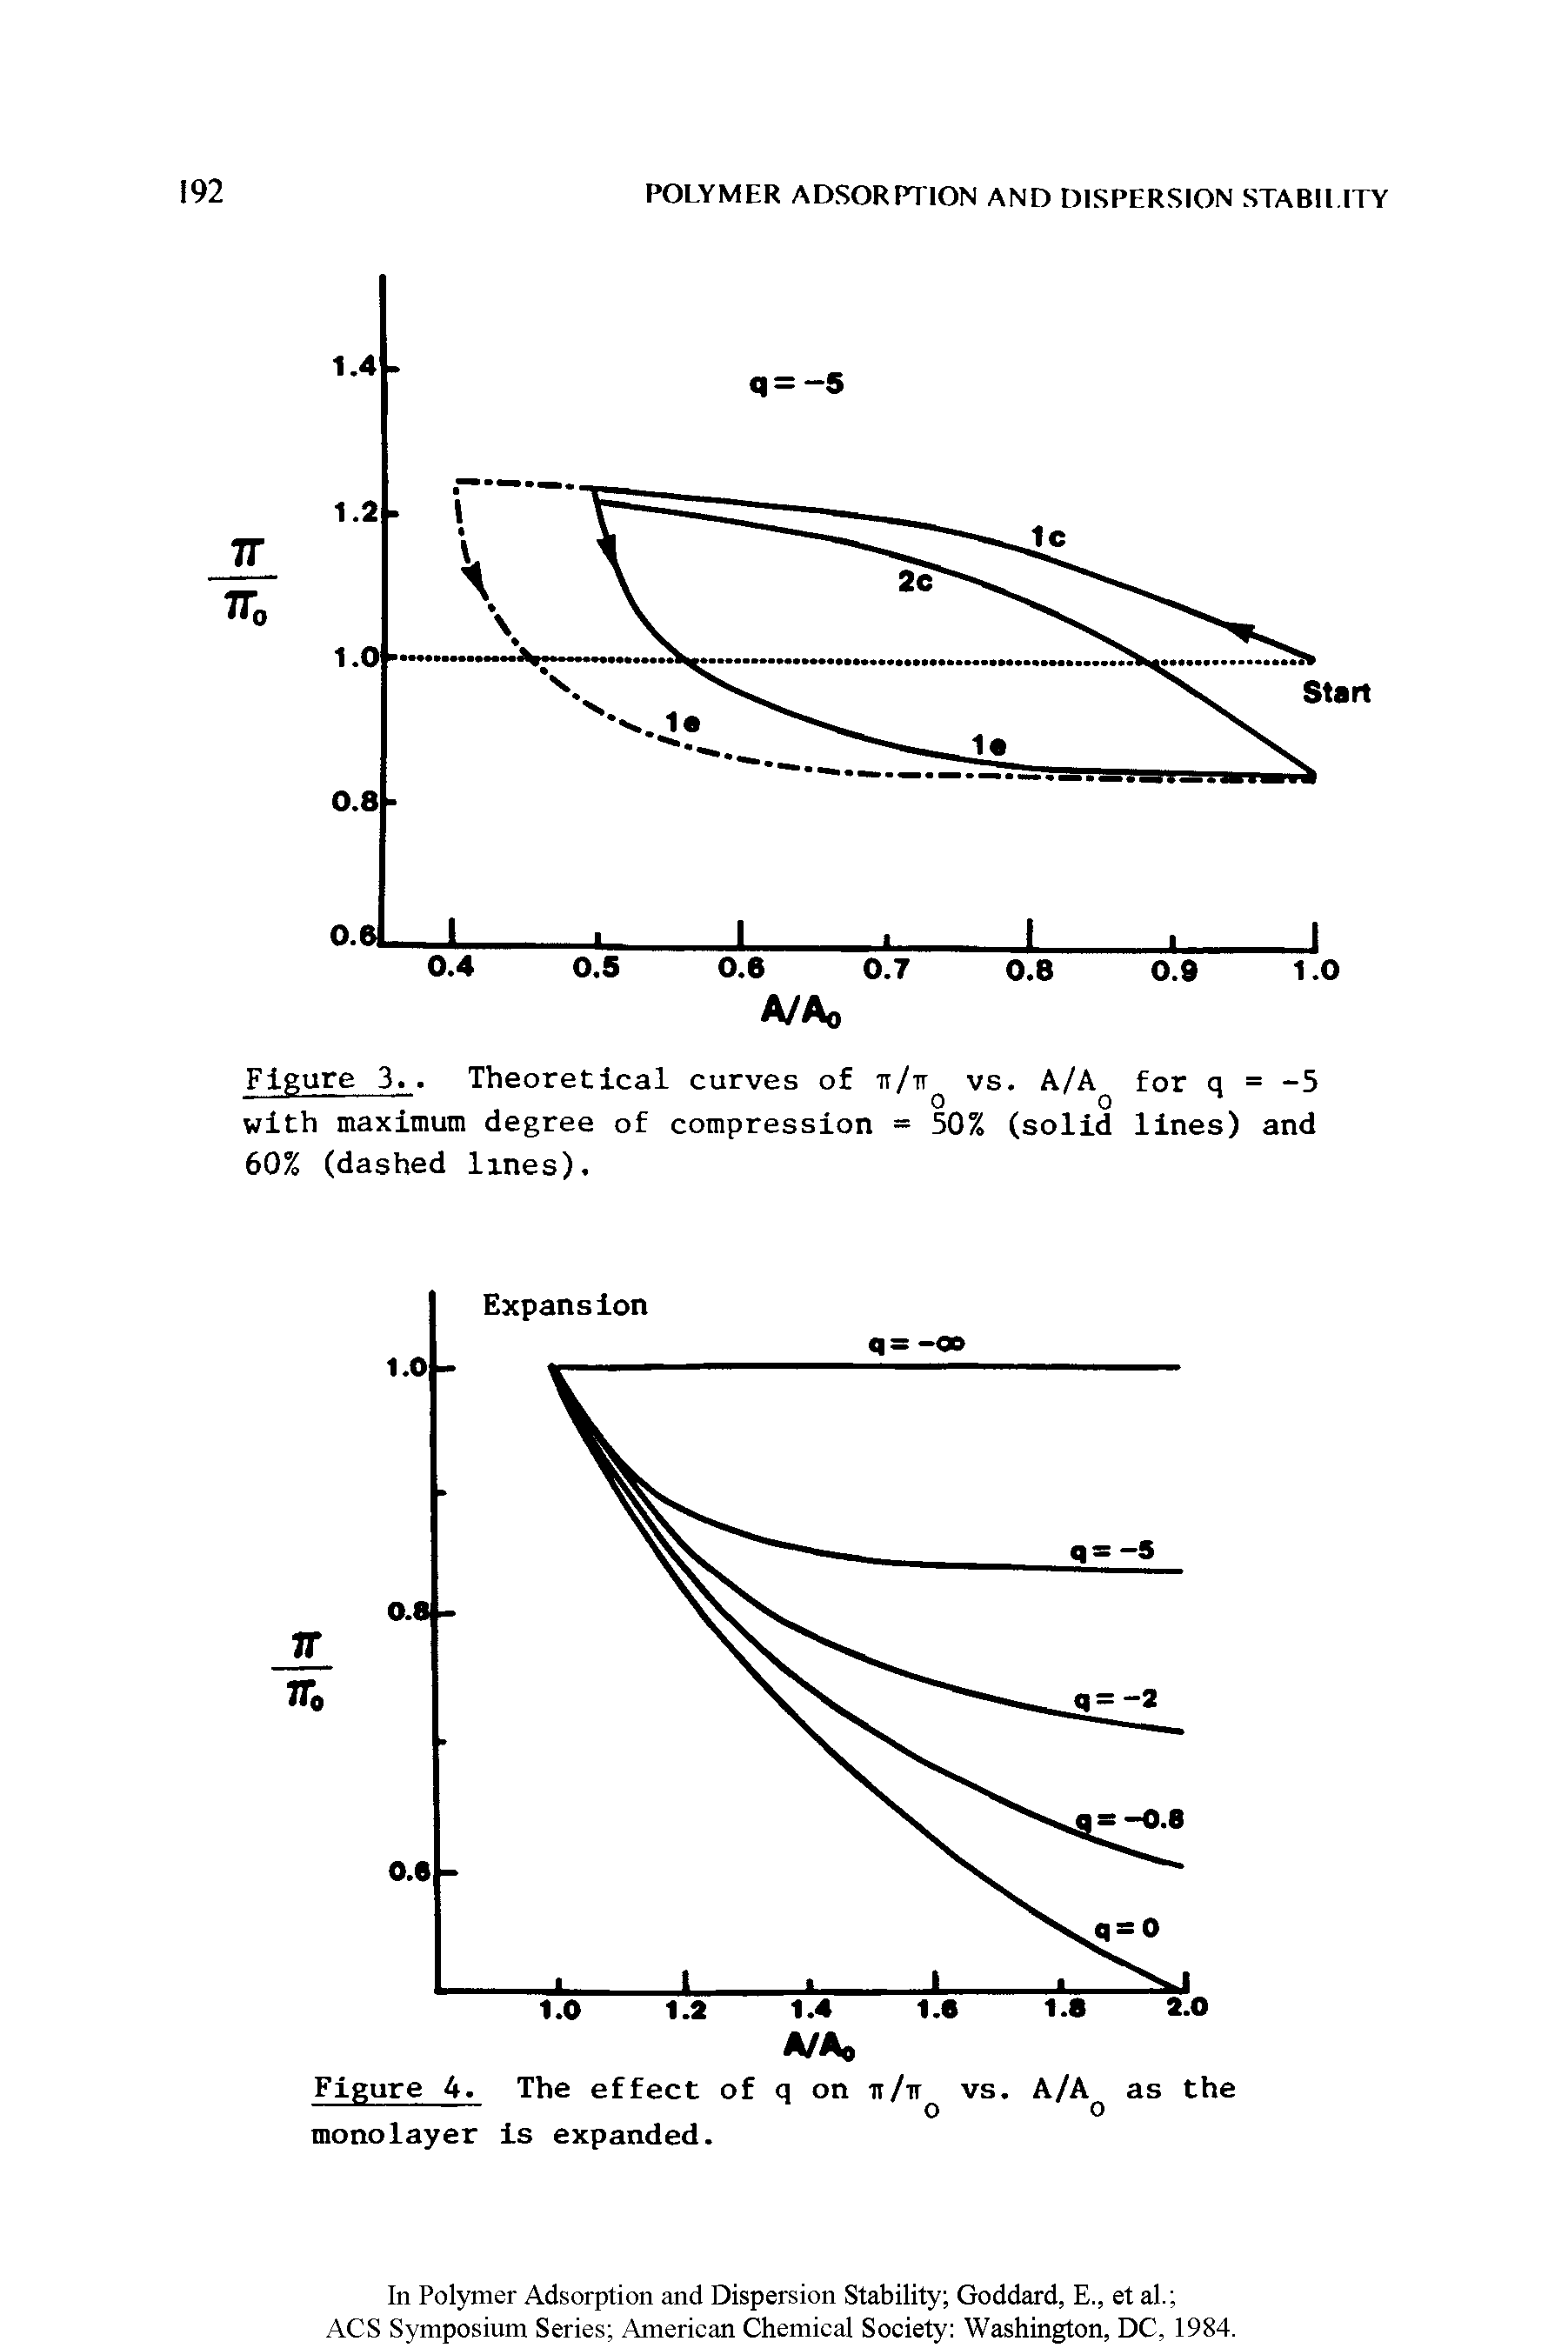 Figure 3.. Theoretical curves of vs. A/Aq for q = -5 with maximum degree of compression = 50% (solid lines) and 60% (dashed lines).